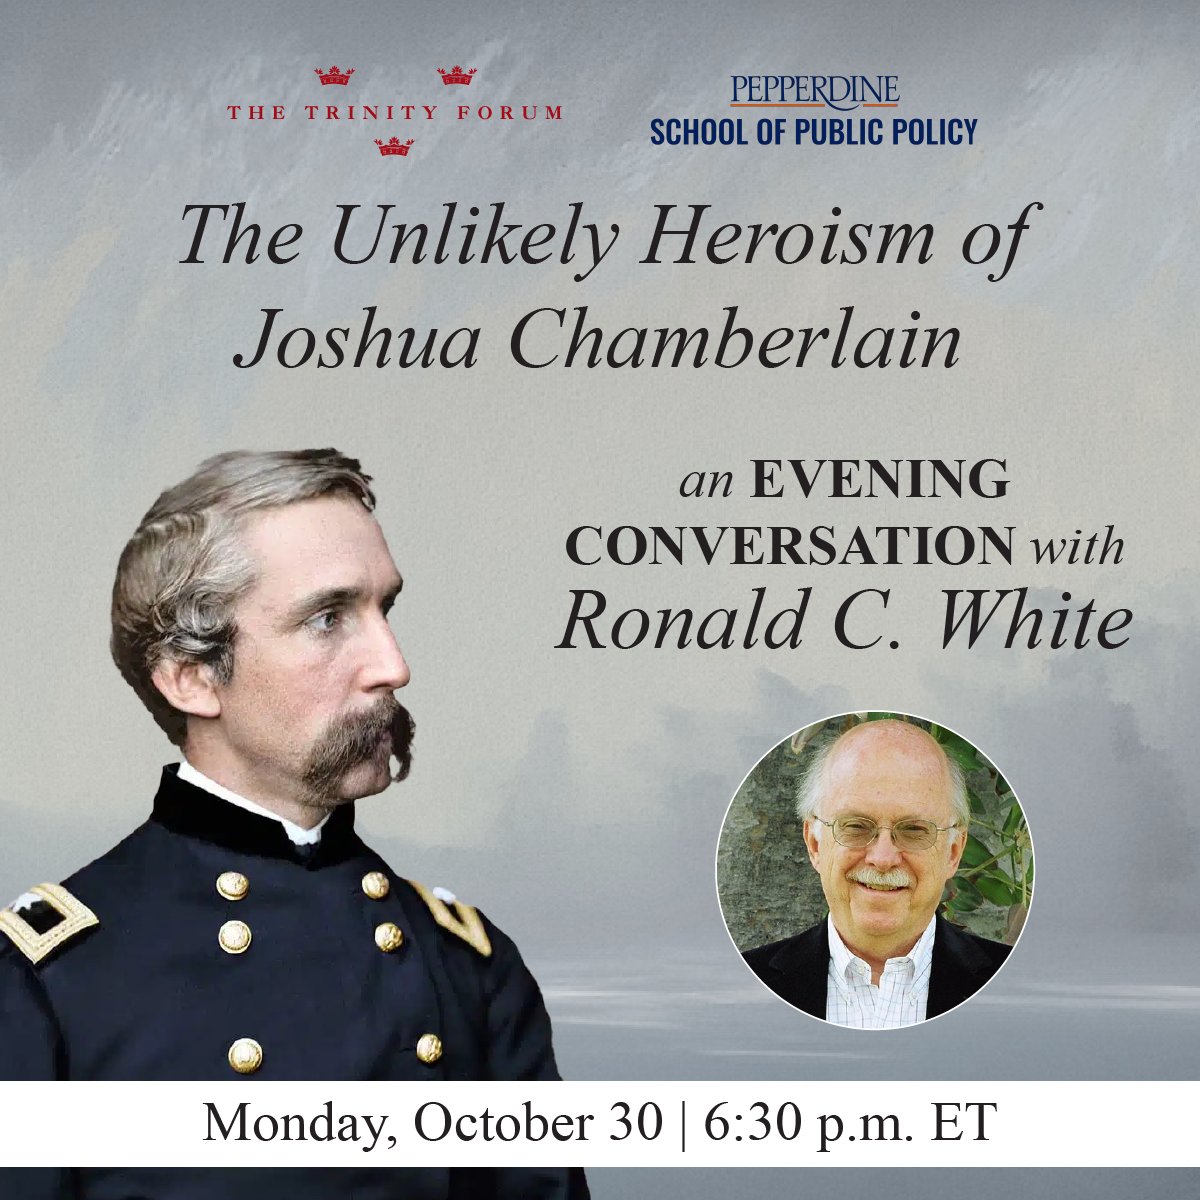 Thrilled to partner again with the @trinityforum for an evening conversation led by senior fellow and historian, @ronaldcwhitejr about the unlikely heroism of Joshua Chamberlain. Register here using code Pepperdine15 to get a discount: ttf.org/evening-conver…